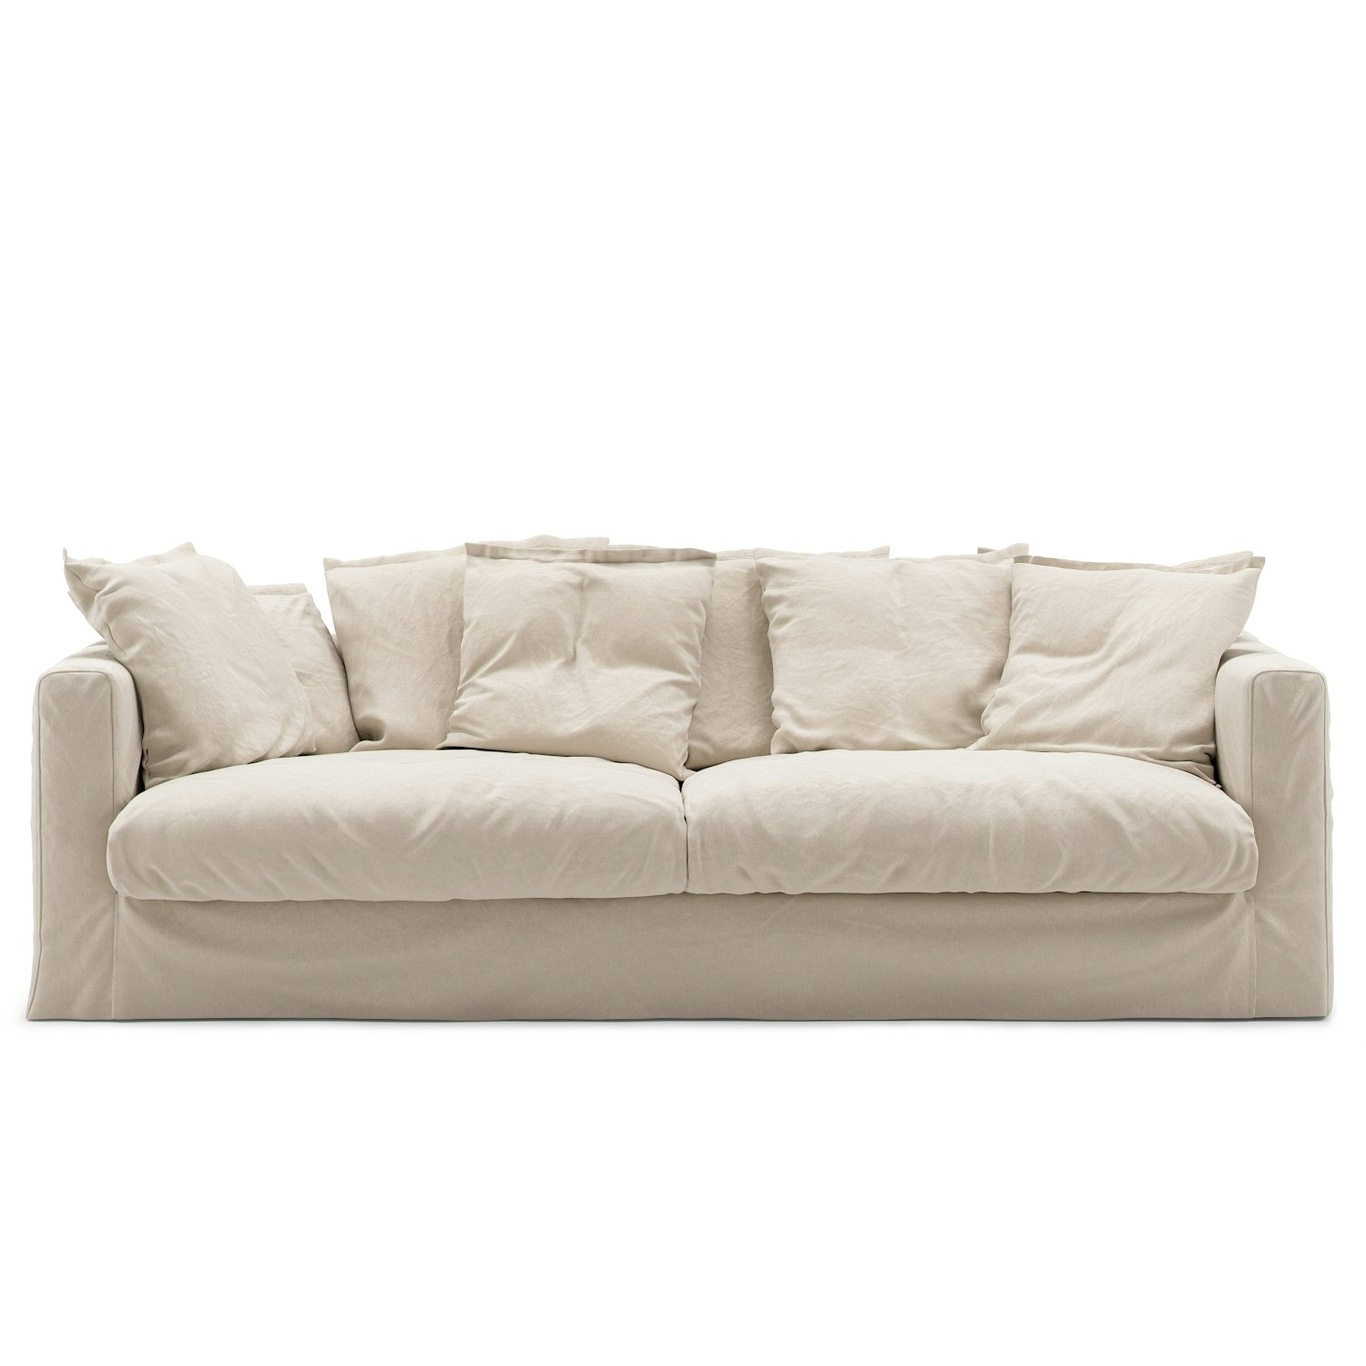 Le Grand Air 3-Personers Sofa Bomuld, Beige